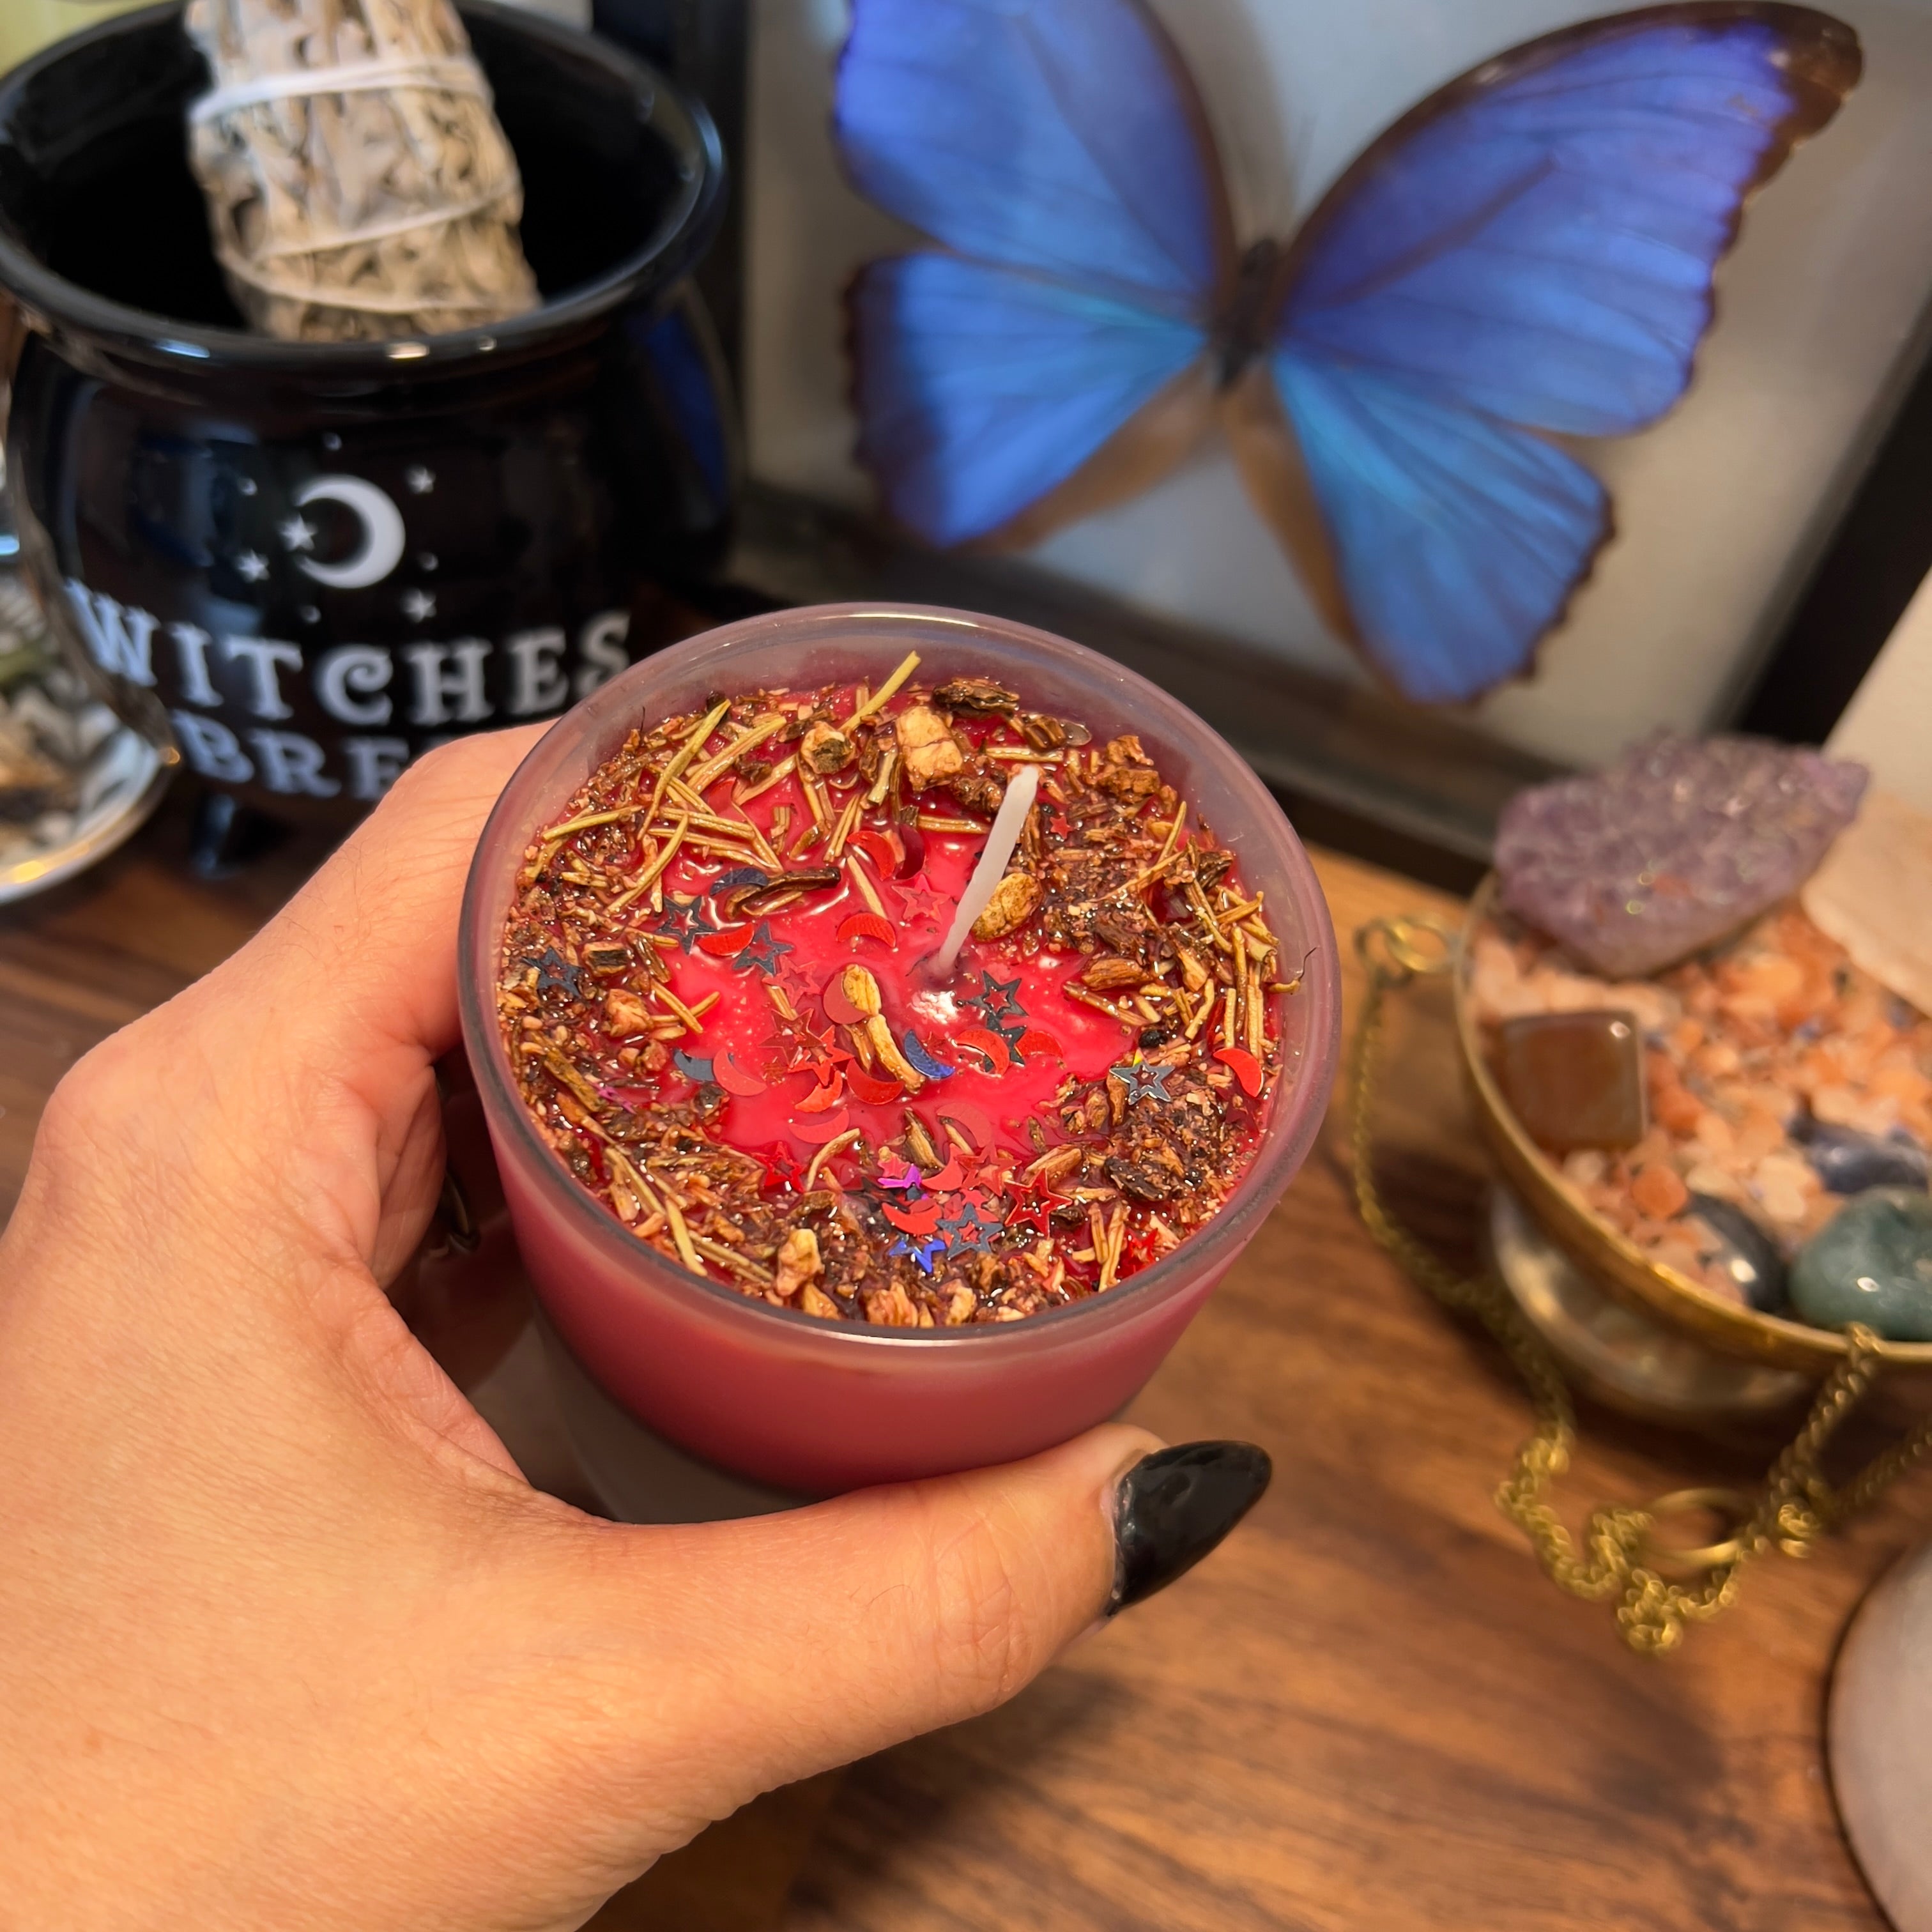 Reversal Fixed Candle - Return to Sender Ward Off Negativity Spiritual Candles  - Witchcraft Oil, Spell Candle, Witch Tools, Crystal Infused